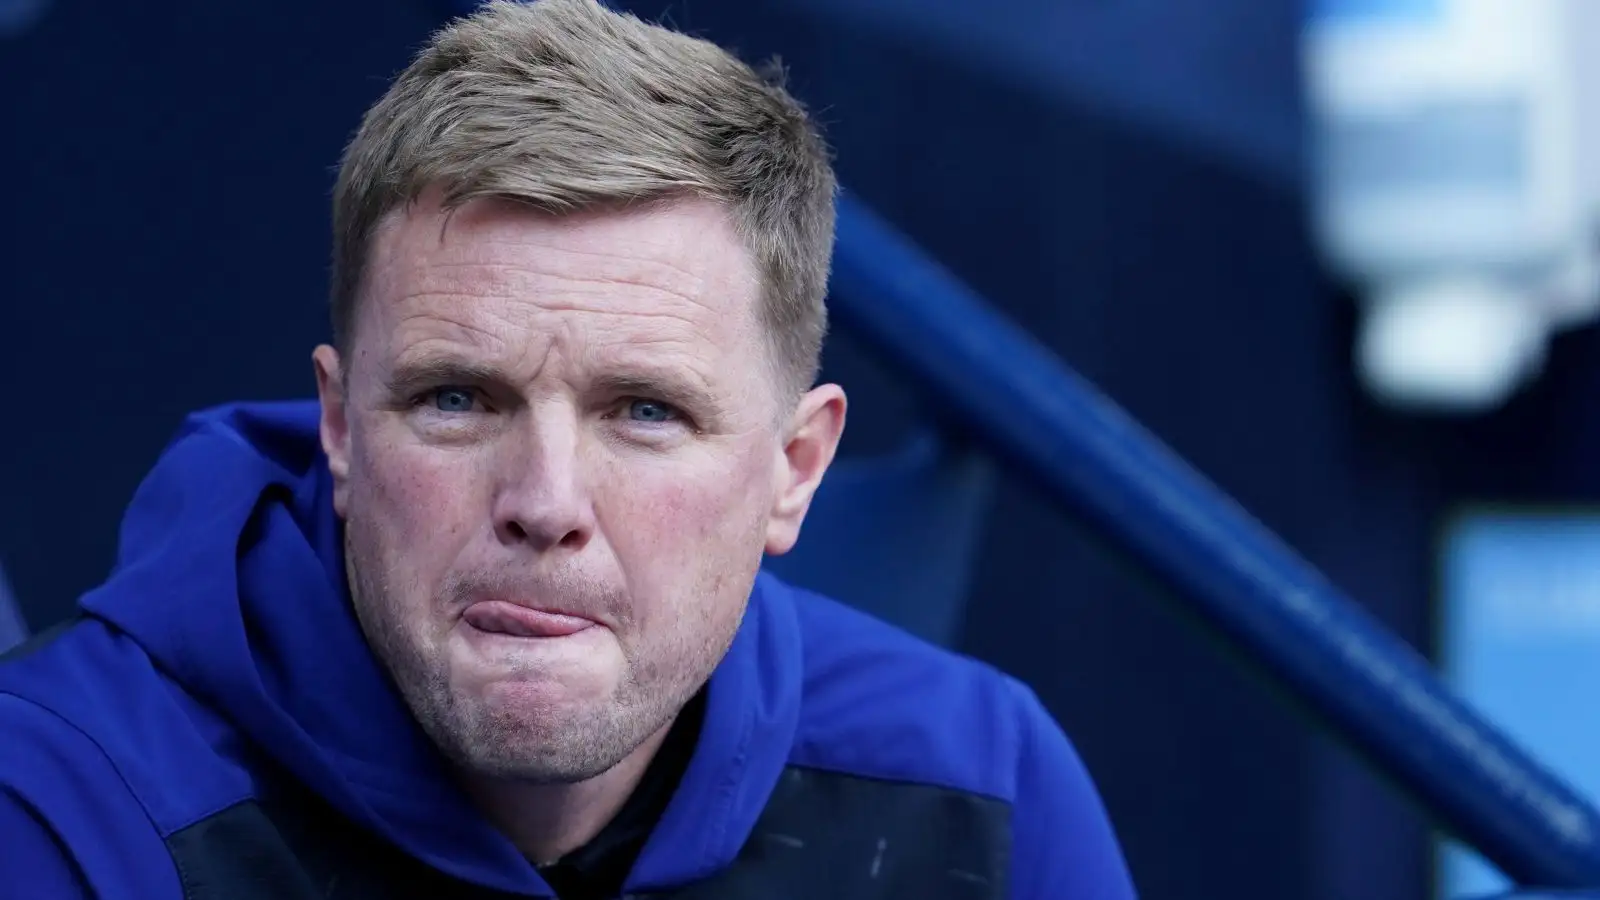 Eddie Howe looks on during a Premier League match.